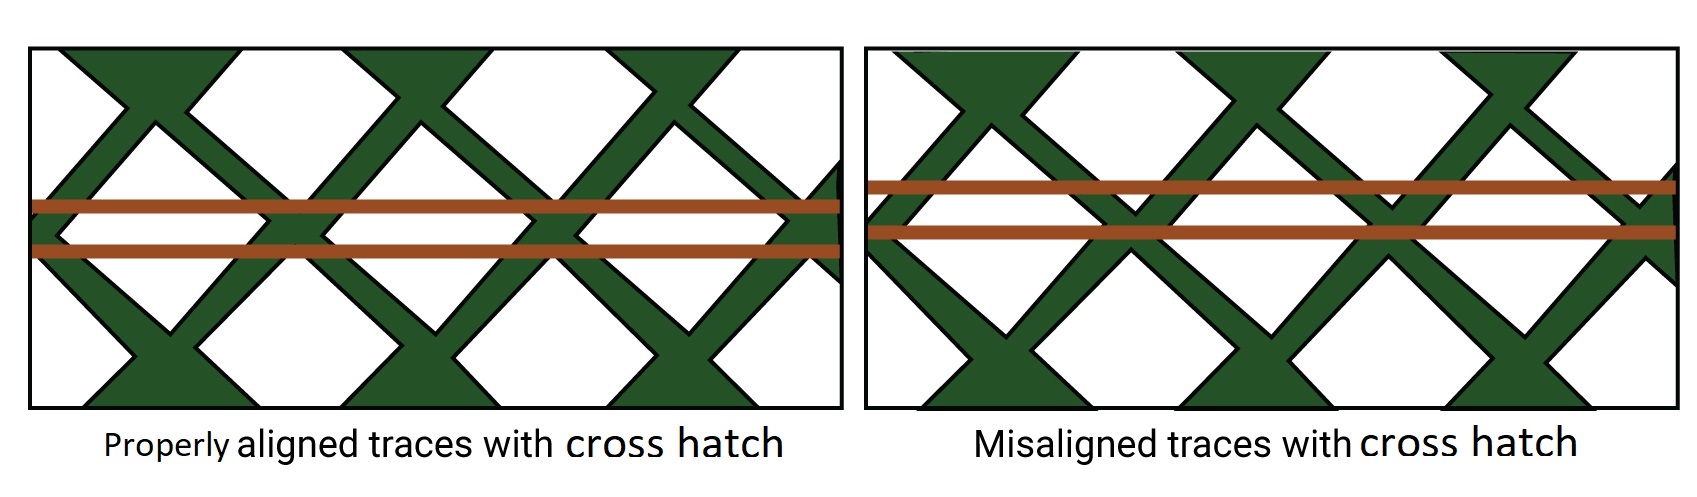 Misalignment of the signal traces in differential pairs